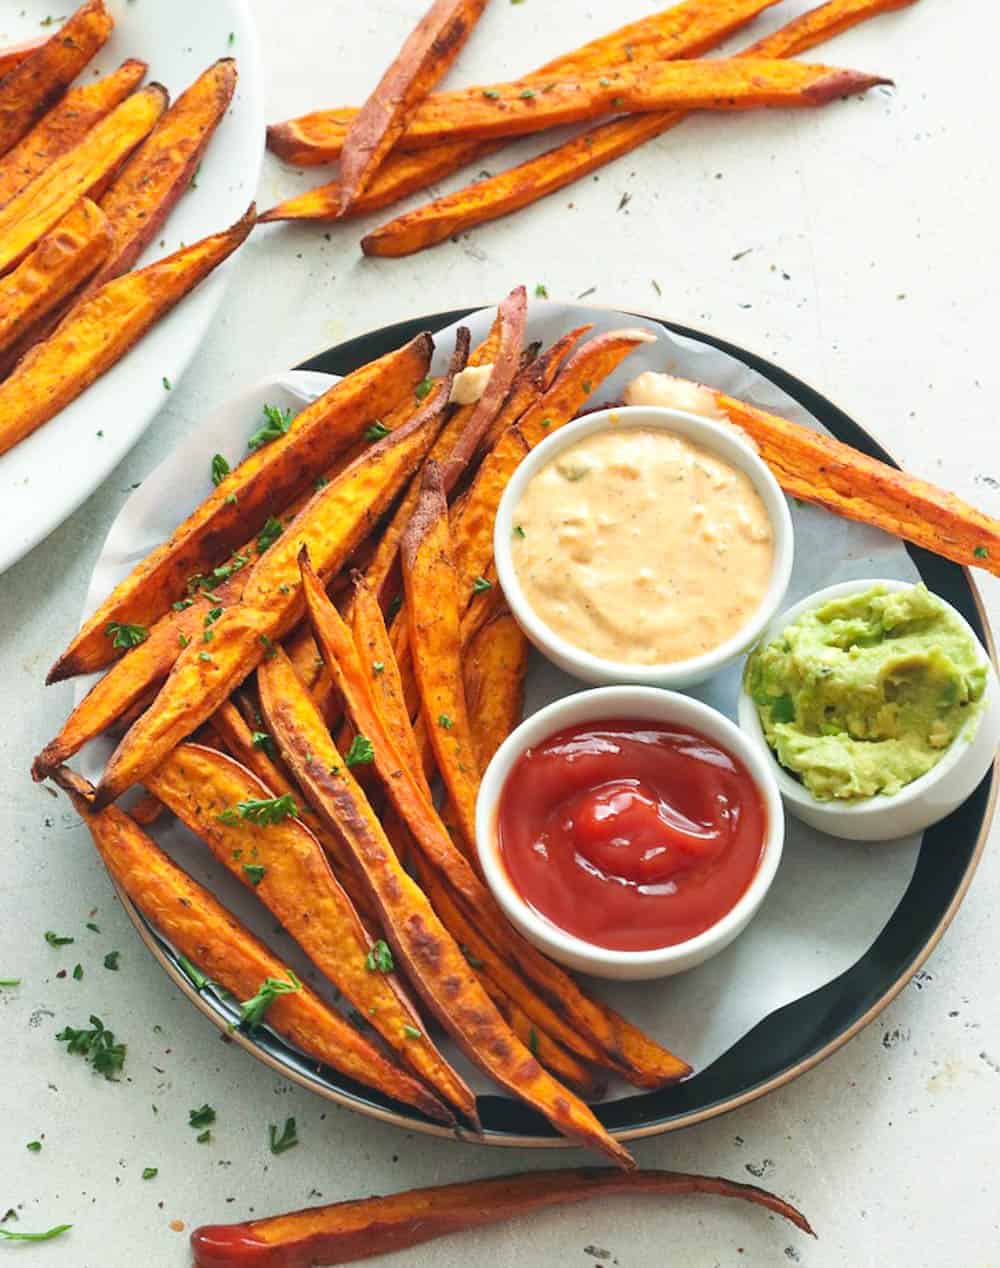 Cajun sweet potato fries are the perfect side for chicken wings